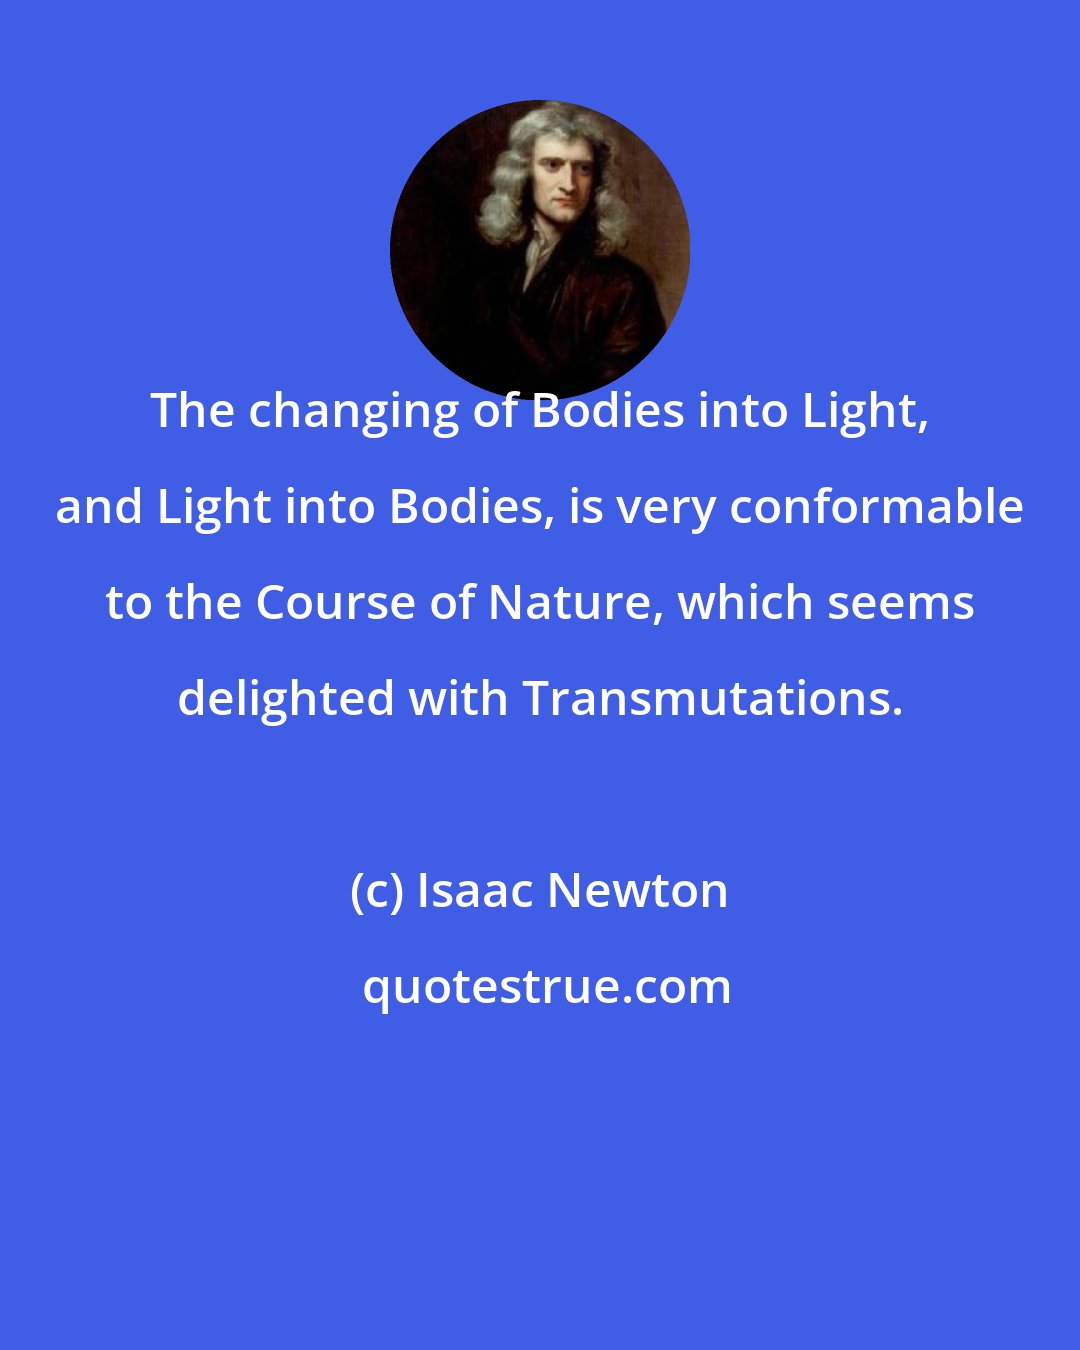 Isaac Newton: The changing of Bodies into Light, and Light into Bodies, is very conformable to the Course of Nature, which seems delighted with Transmutations.